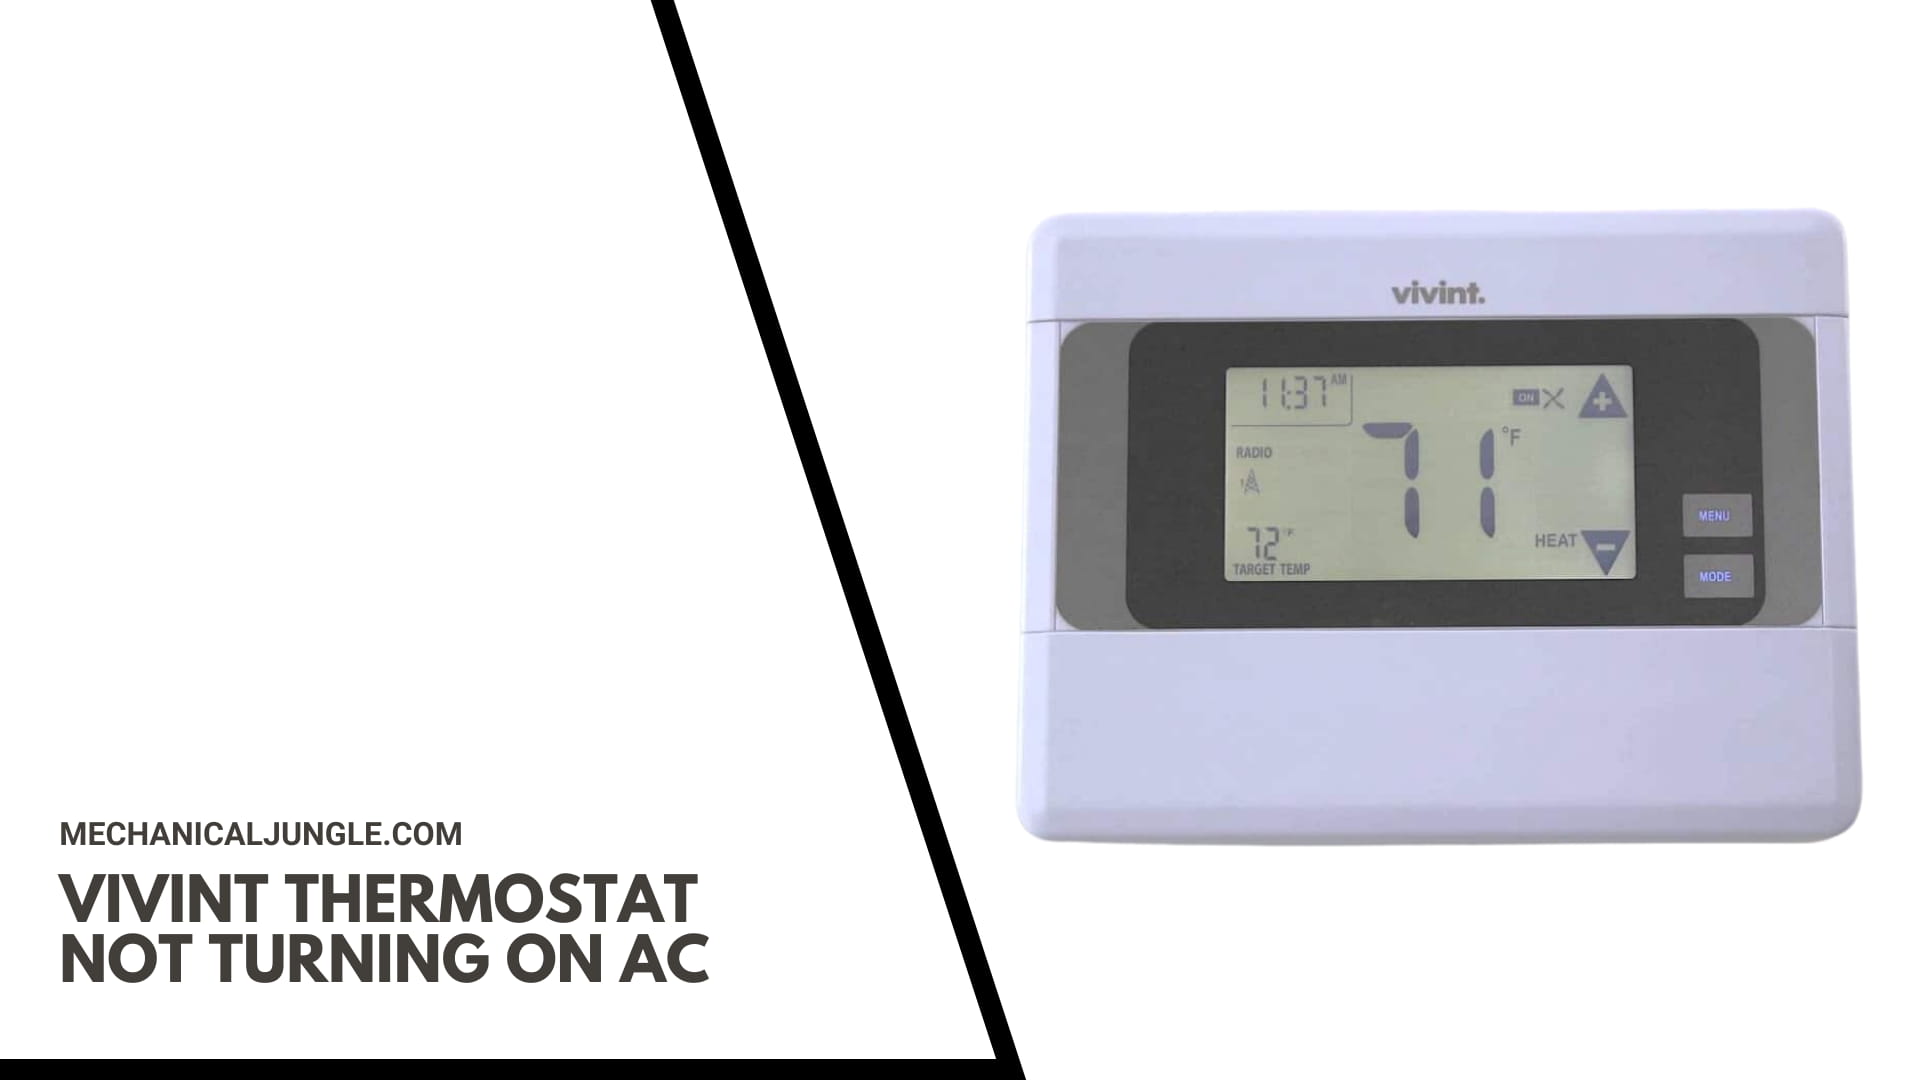 Vivint Thermostat Not Turning on AC